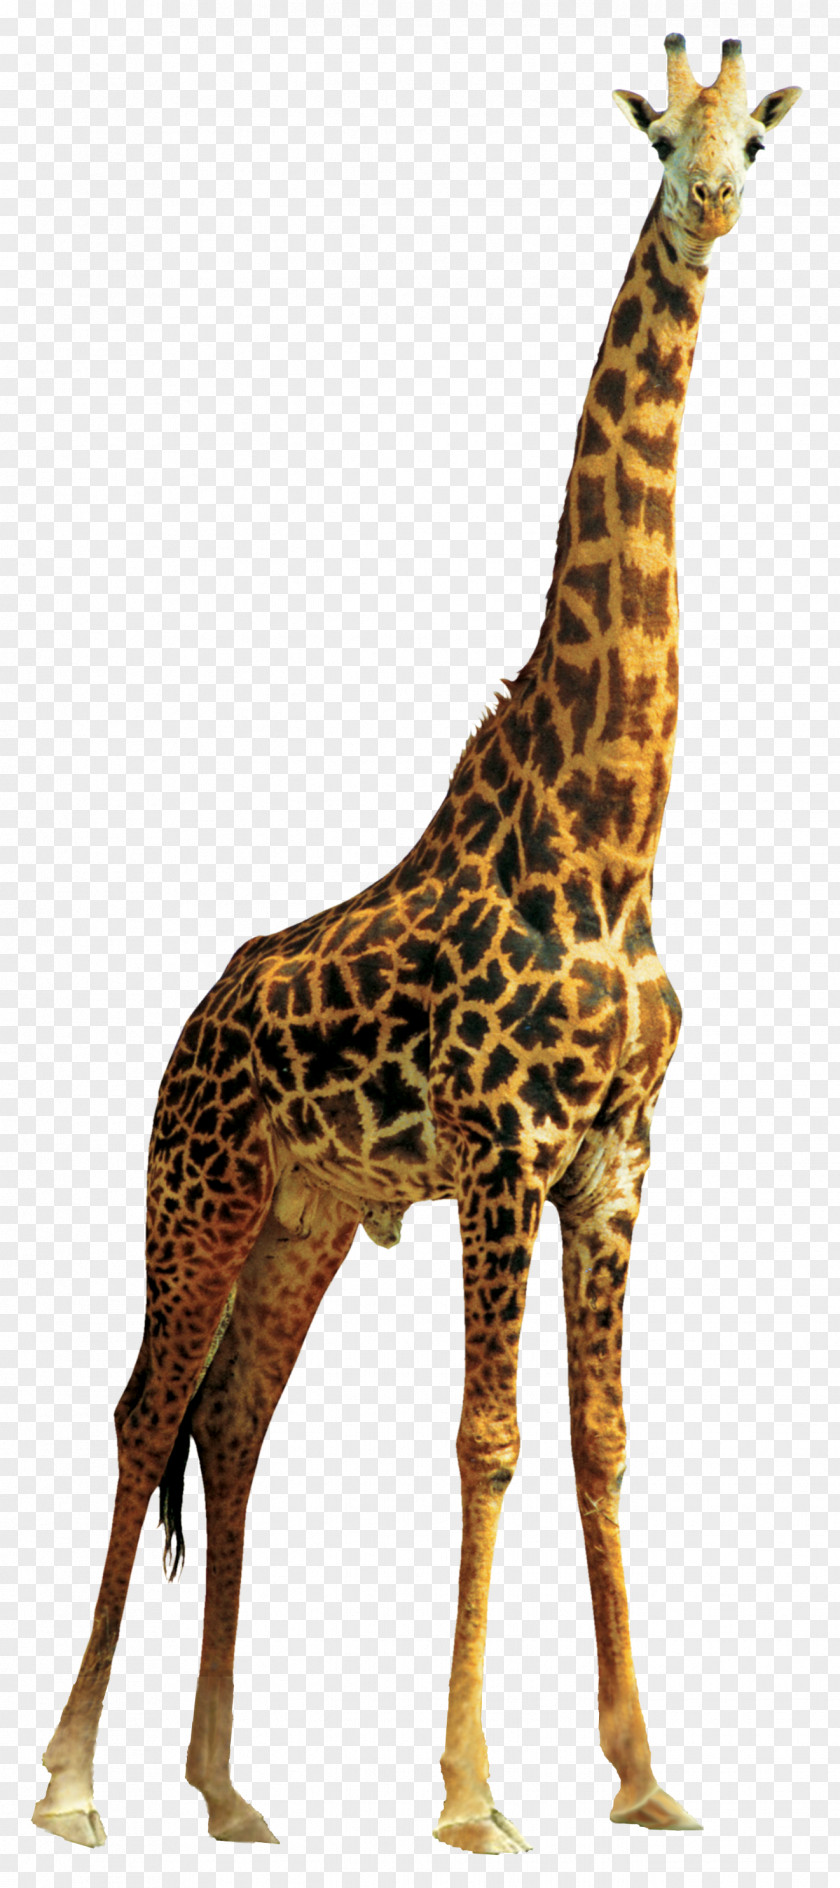 Giraffe Northern Transparency And Translucency Animal PNG